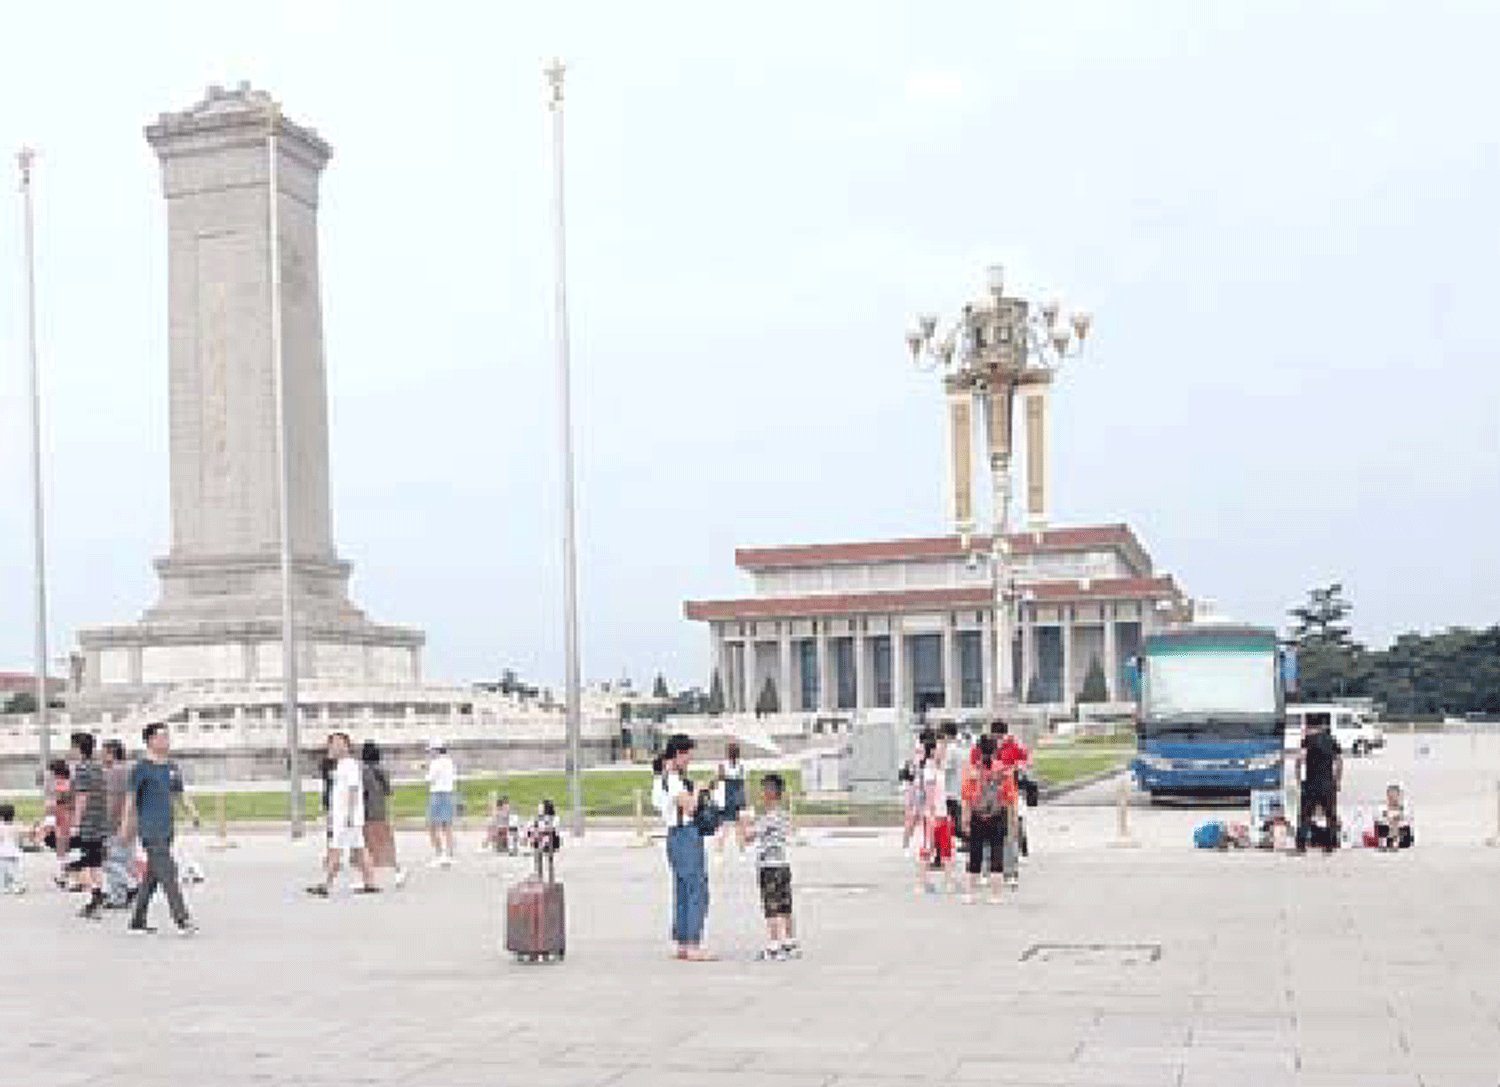 Mobbed at Tiananmen Square, stunned in China’s Harbin